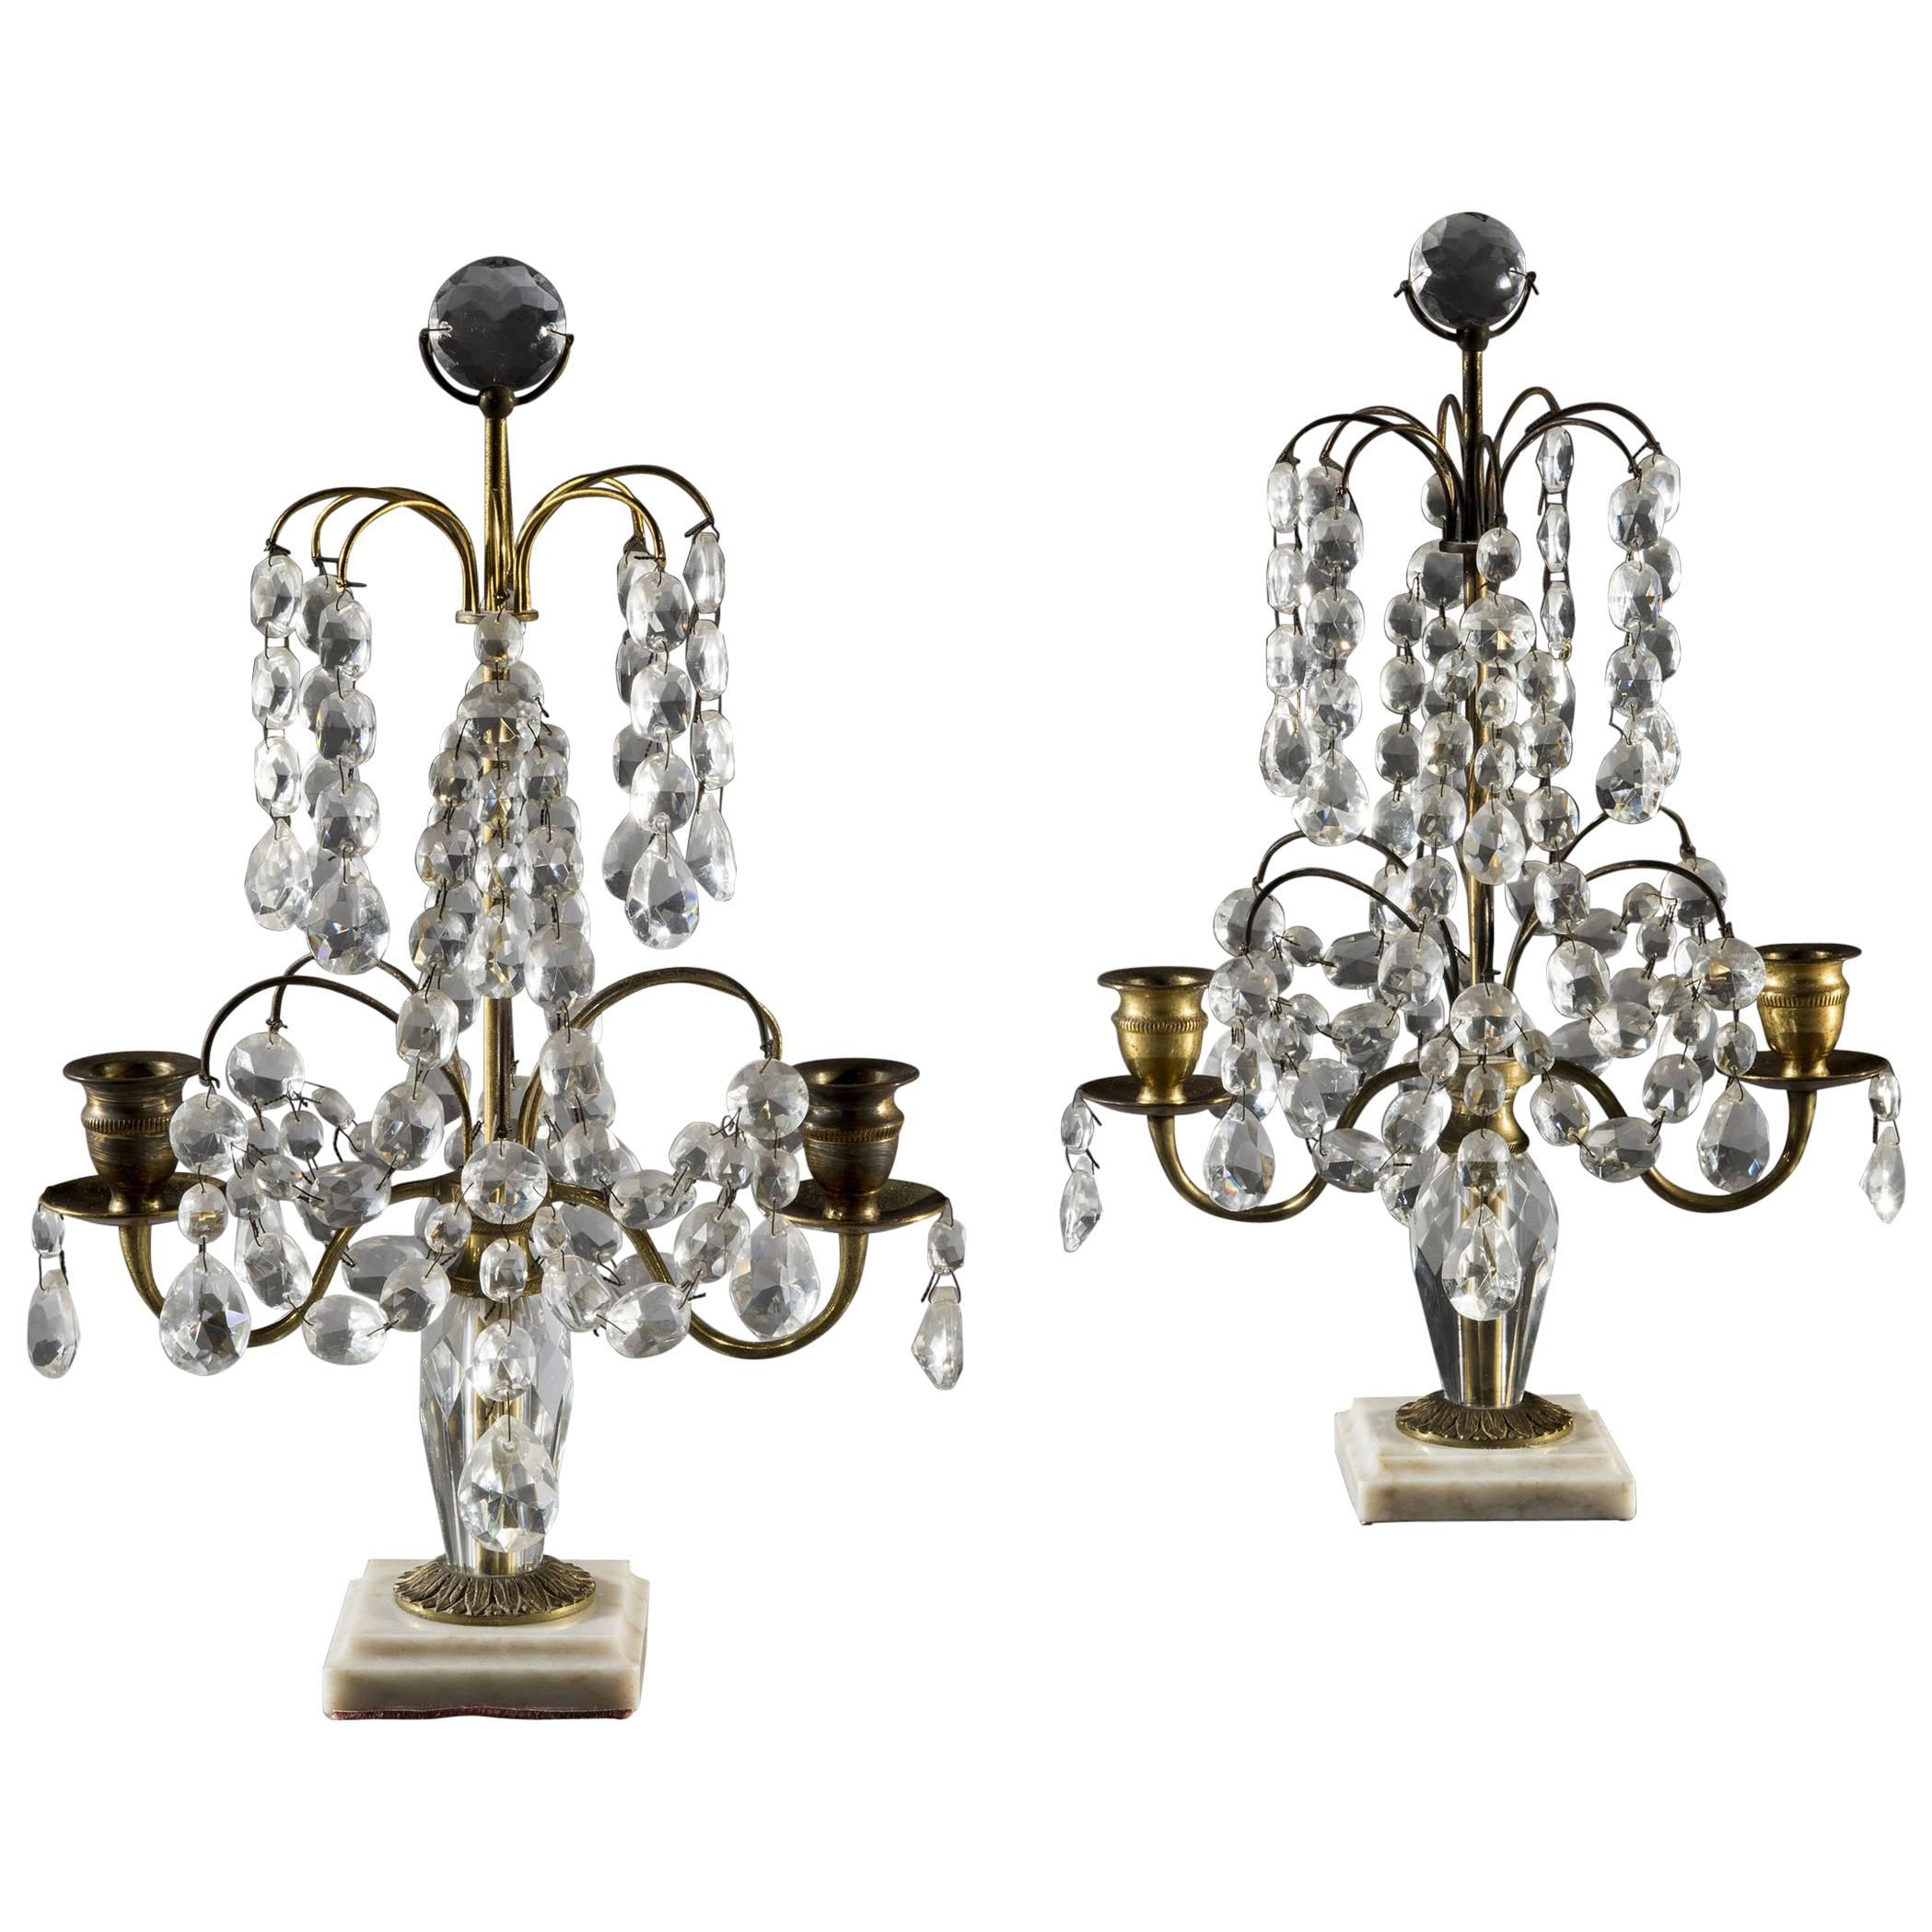 Pair of Victorian Cut-Glass Candelabra Candlesticks on Marble Bases